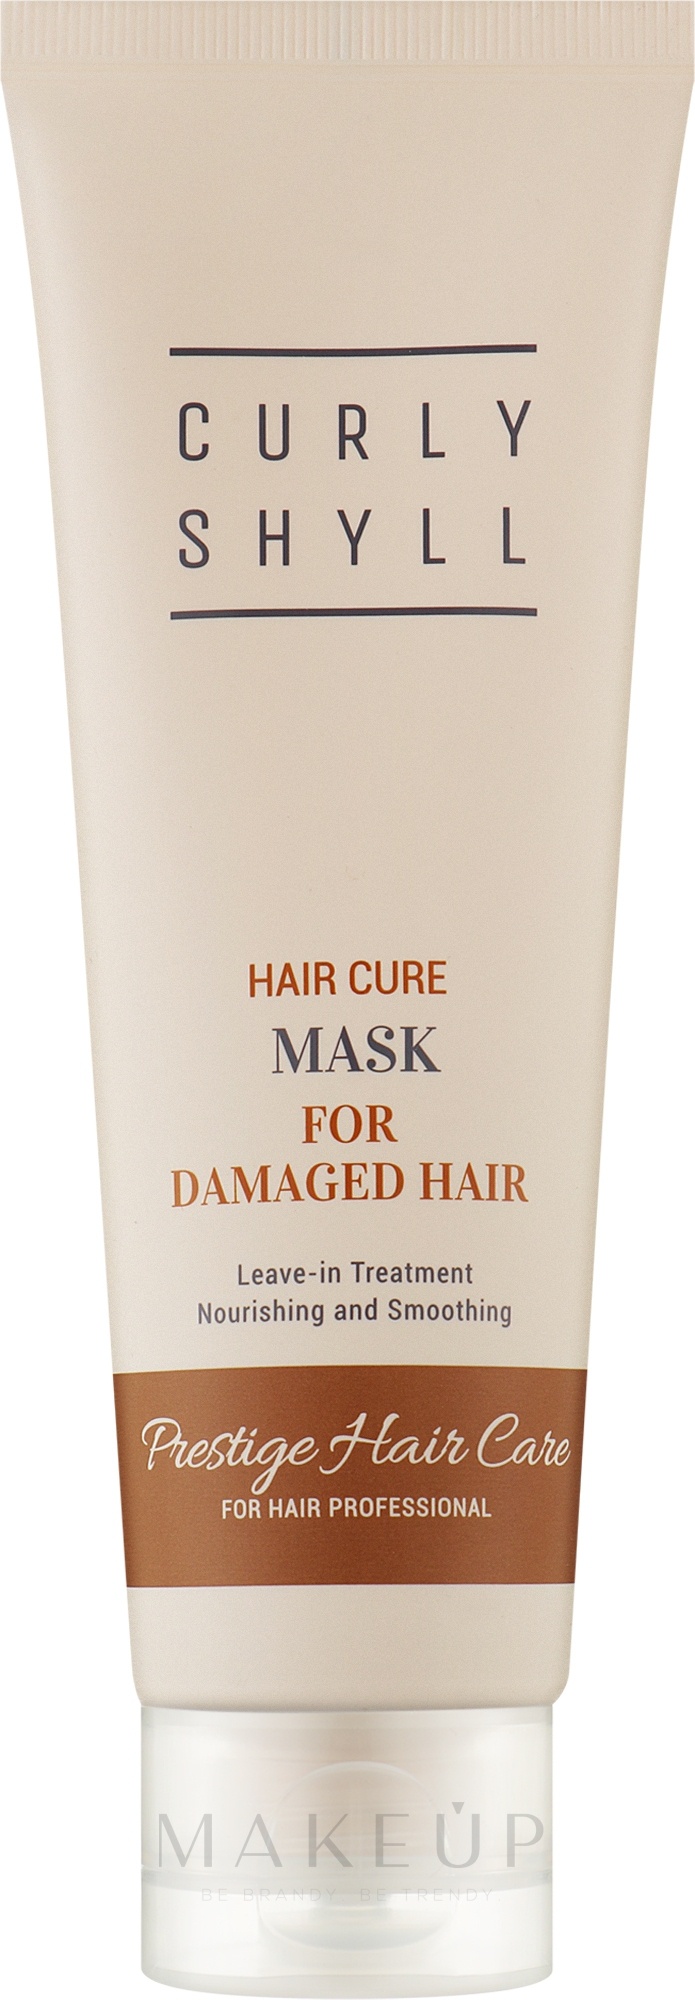 CURLY SHYLL Hair Cure Mask For Damaged Hair